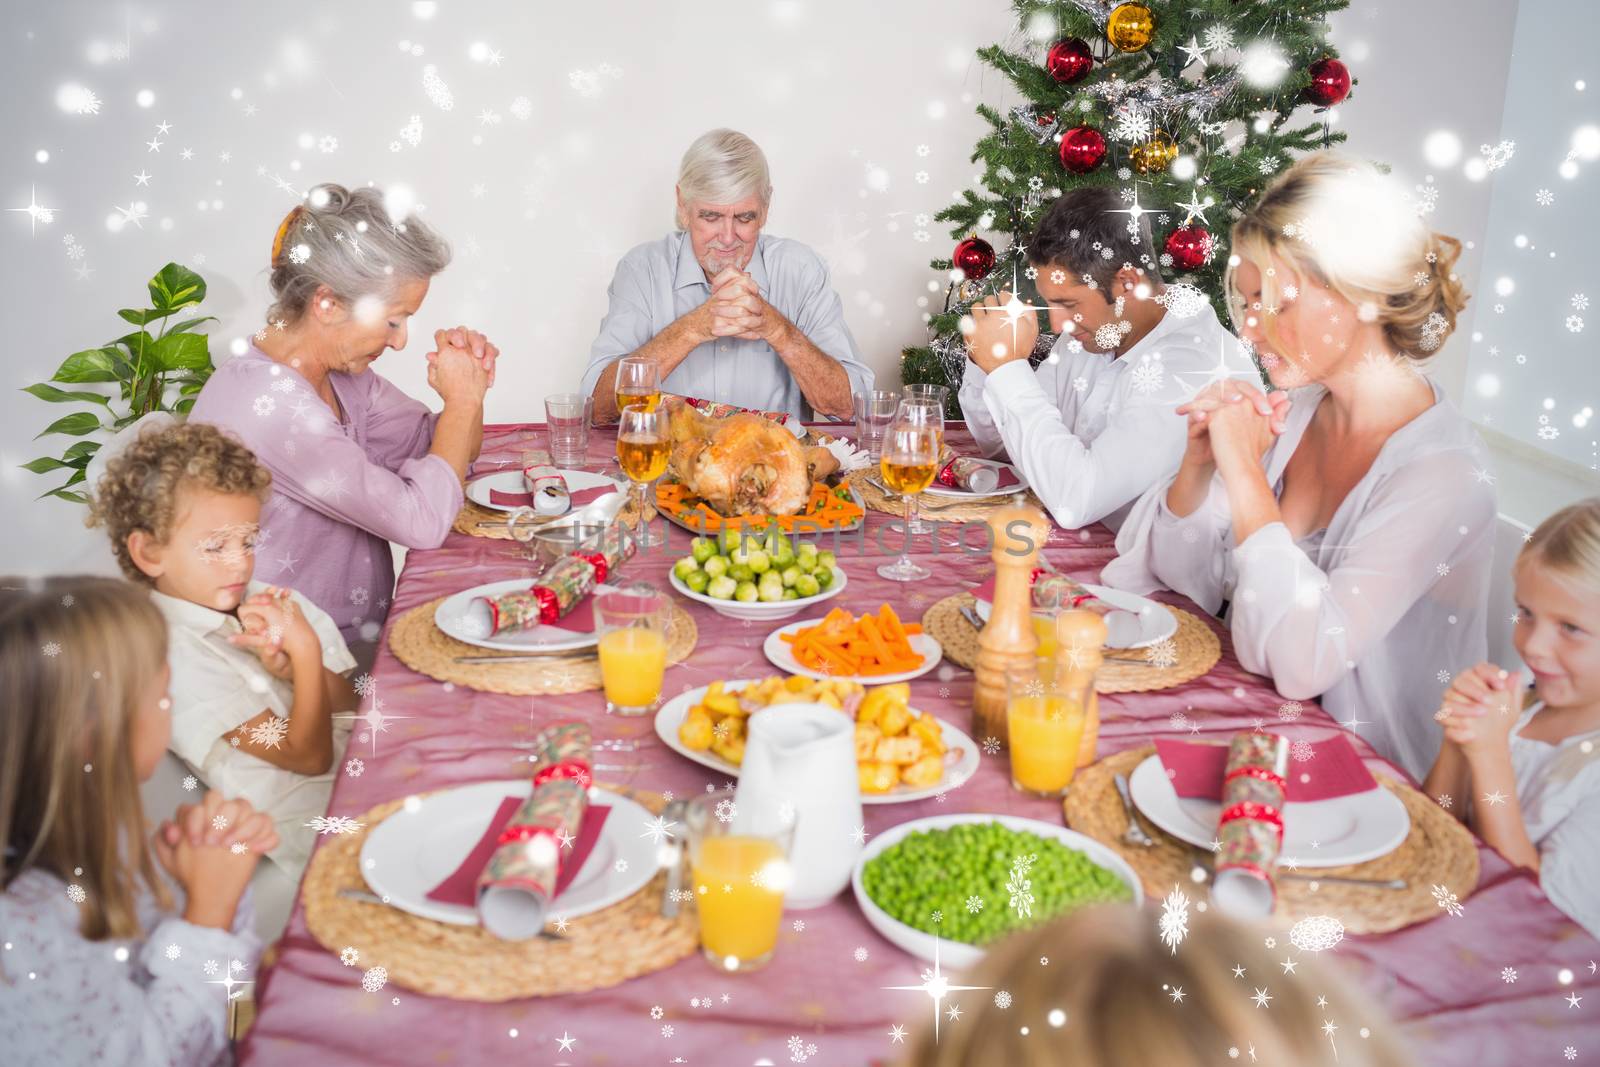 Composite image of Family saying grace before christmas dinner against snow falling